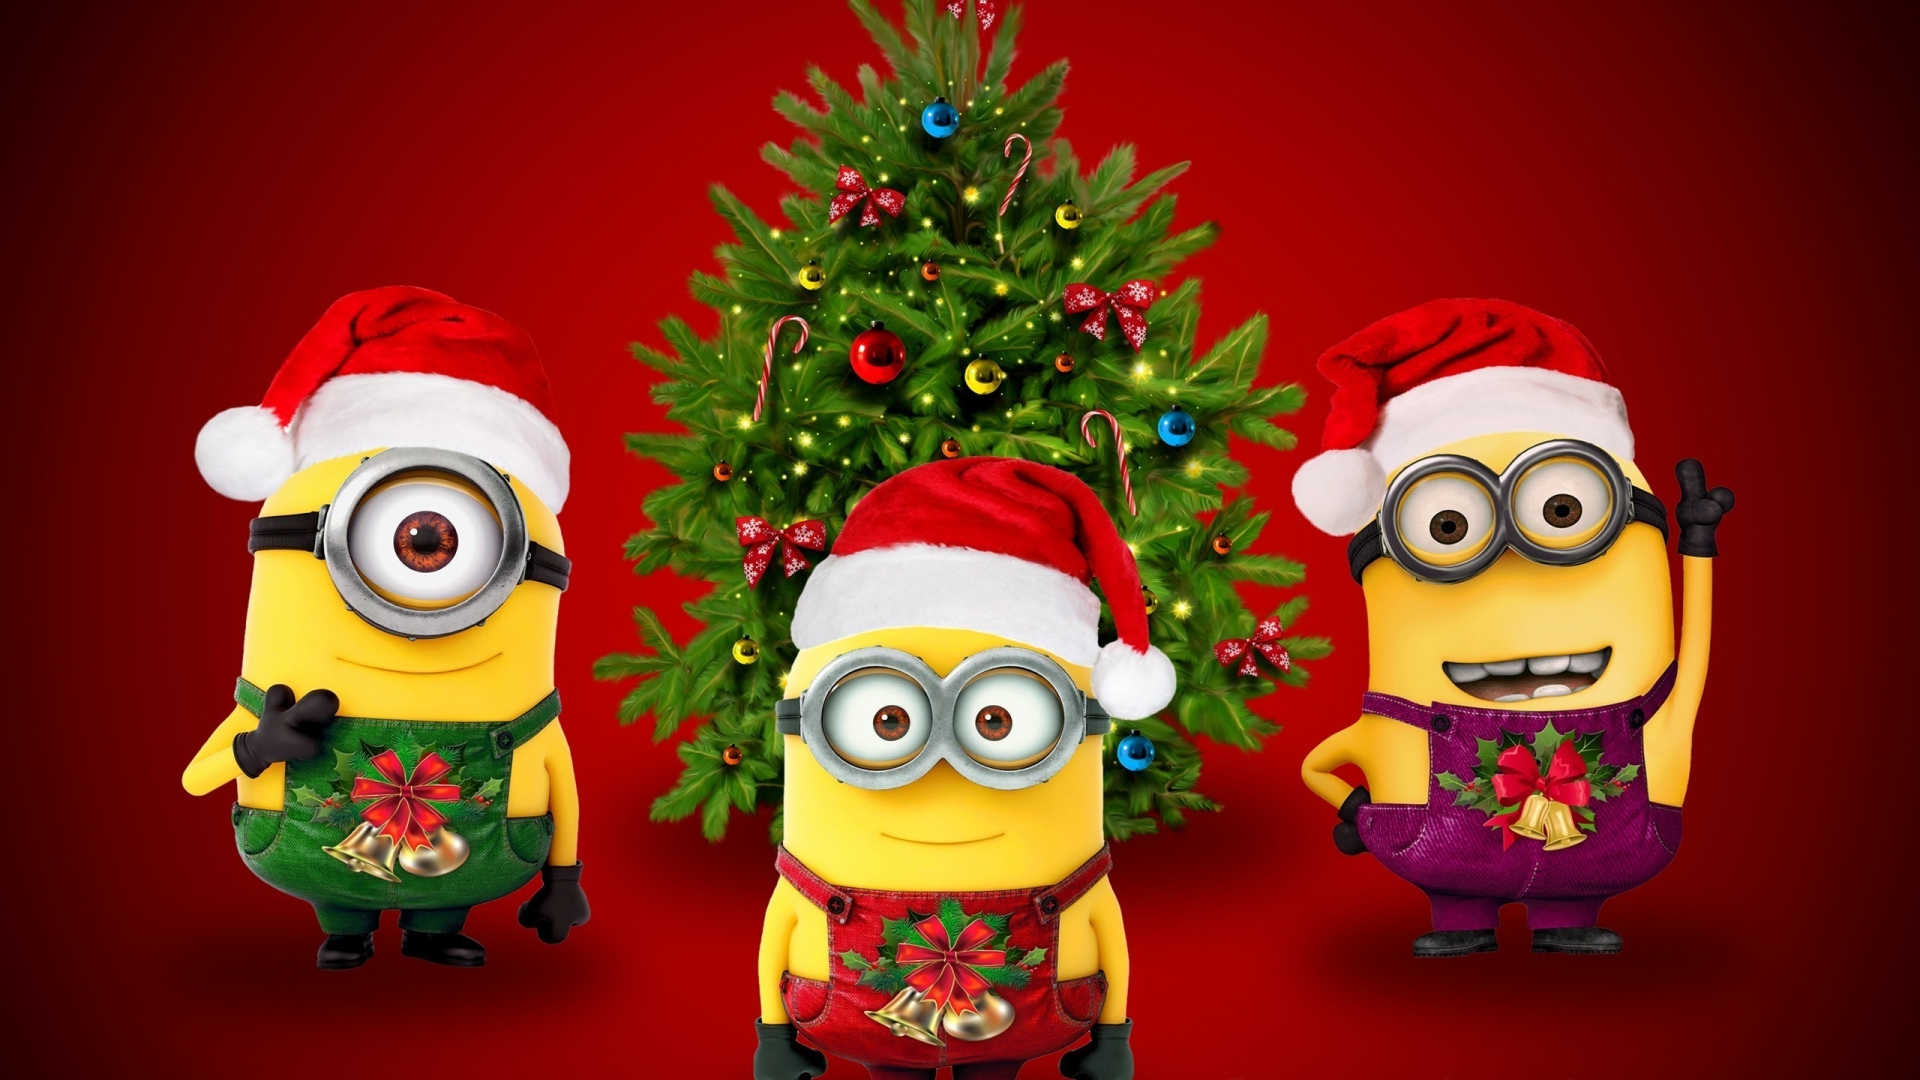 Christmas & Minions for 1920 x 1080 HDTV 1080p resolution